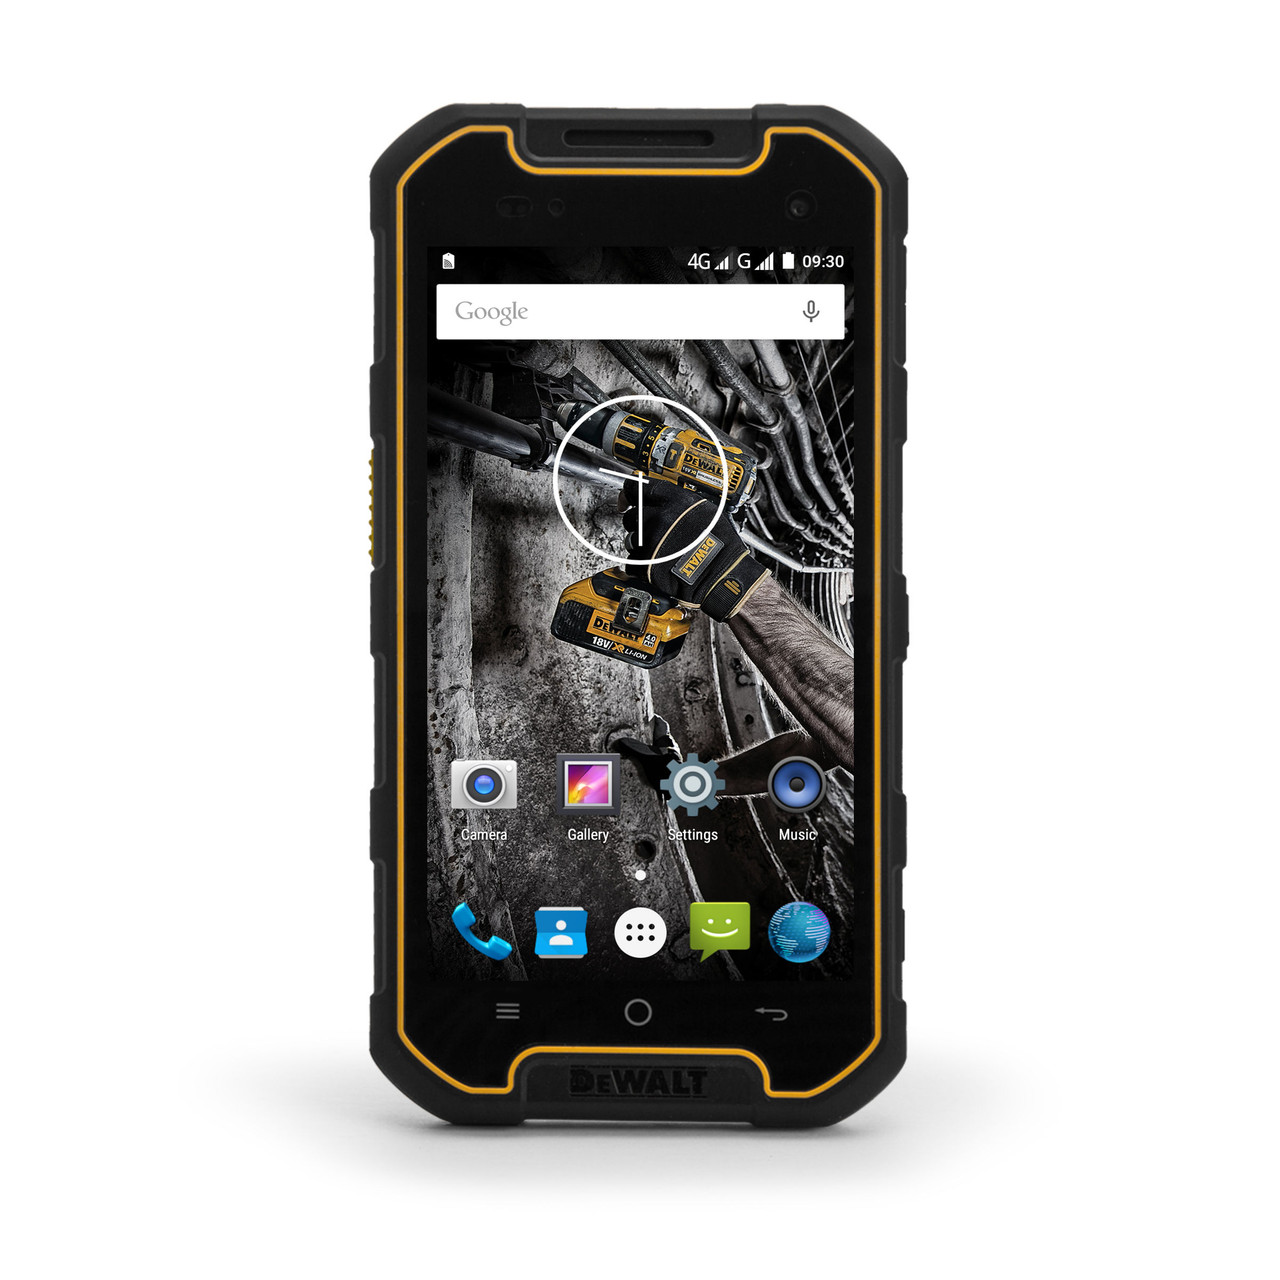 MD501 Android Smartphone